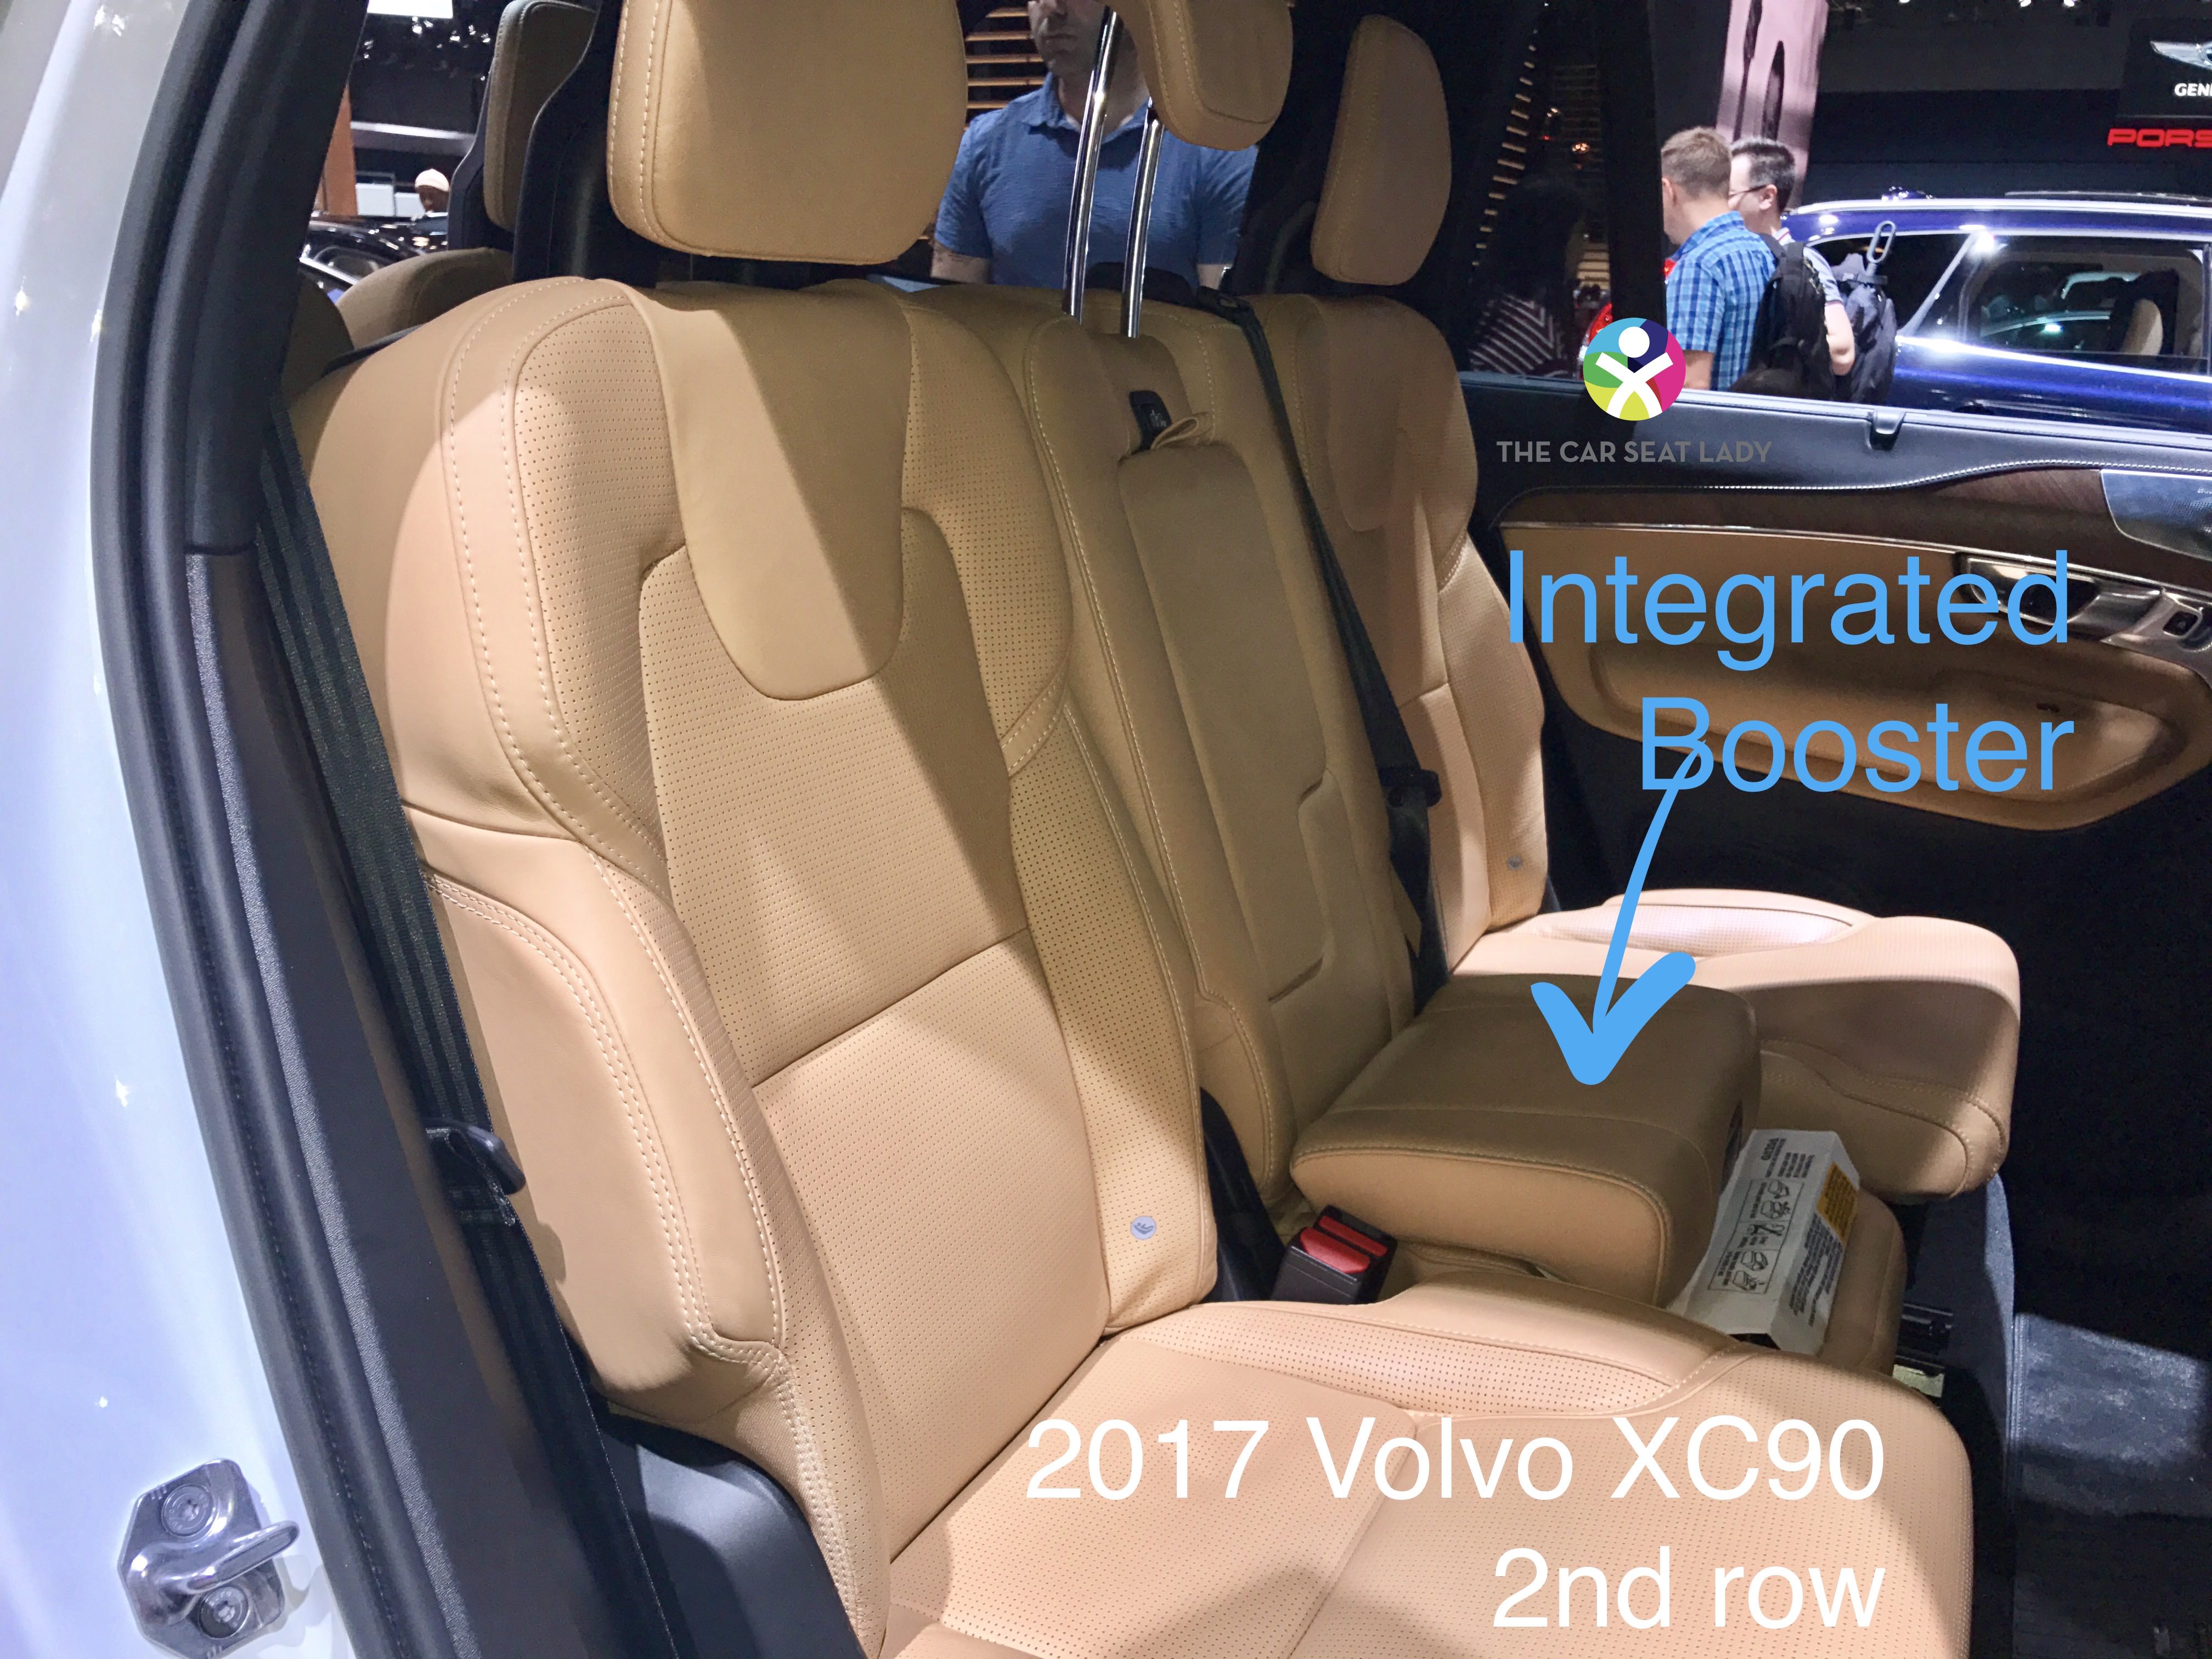 Volvo Cars celebrates 25th anniversary of the integrated booster